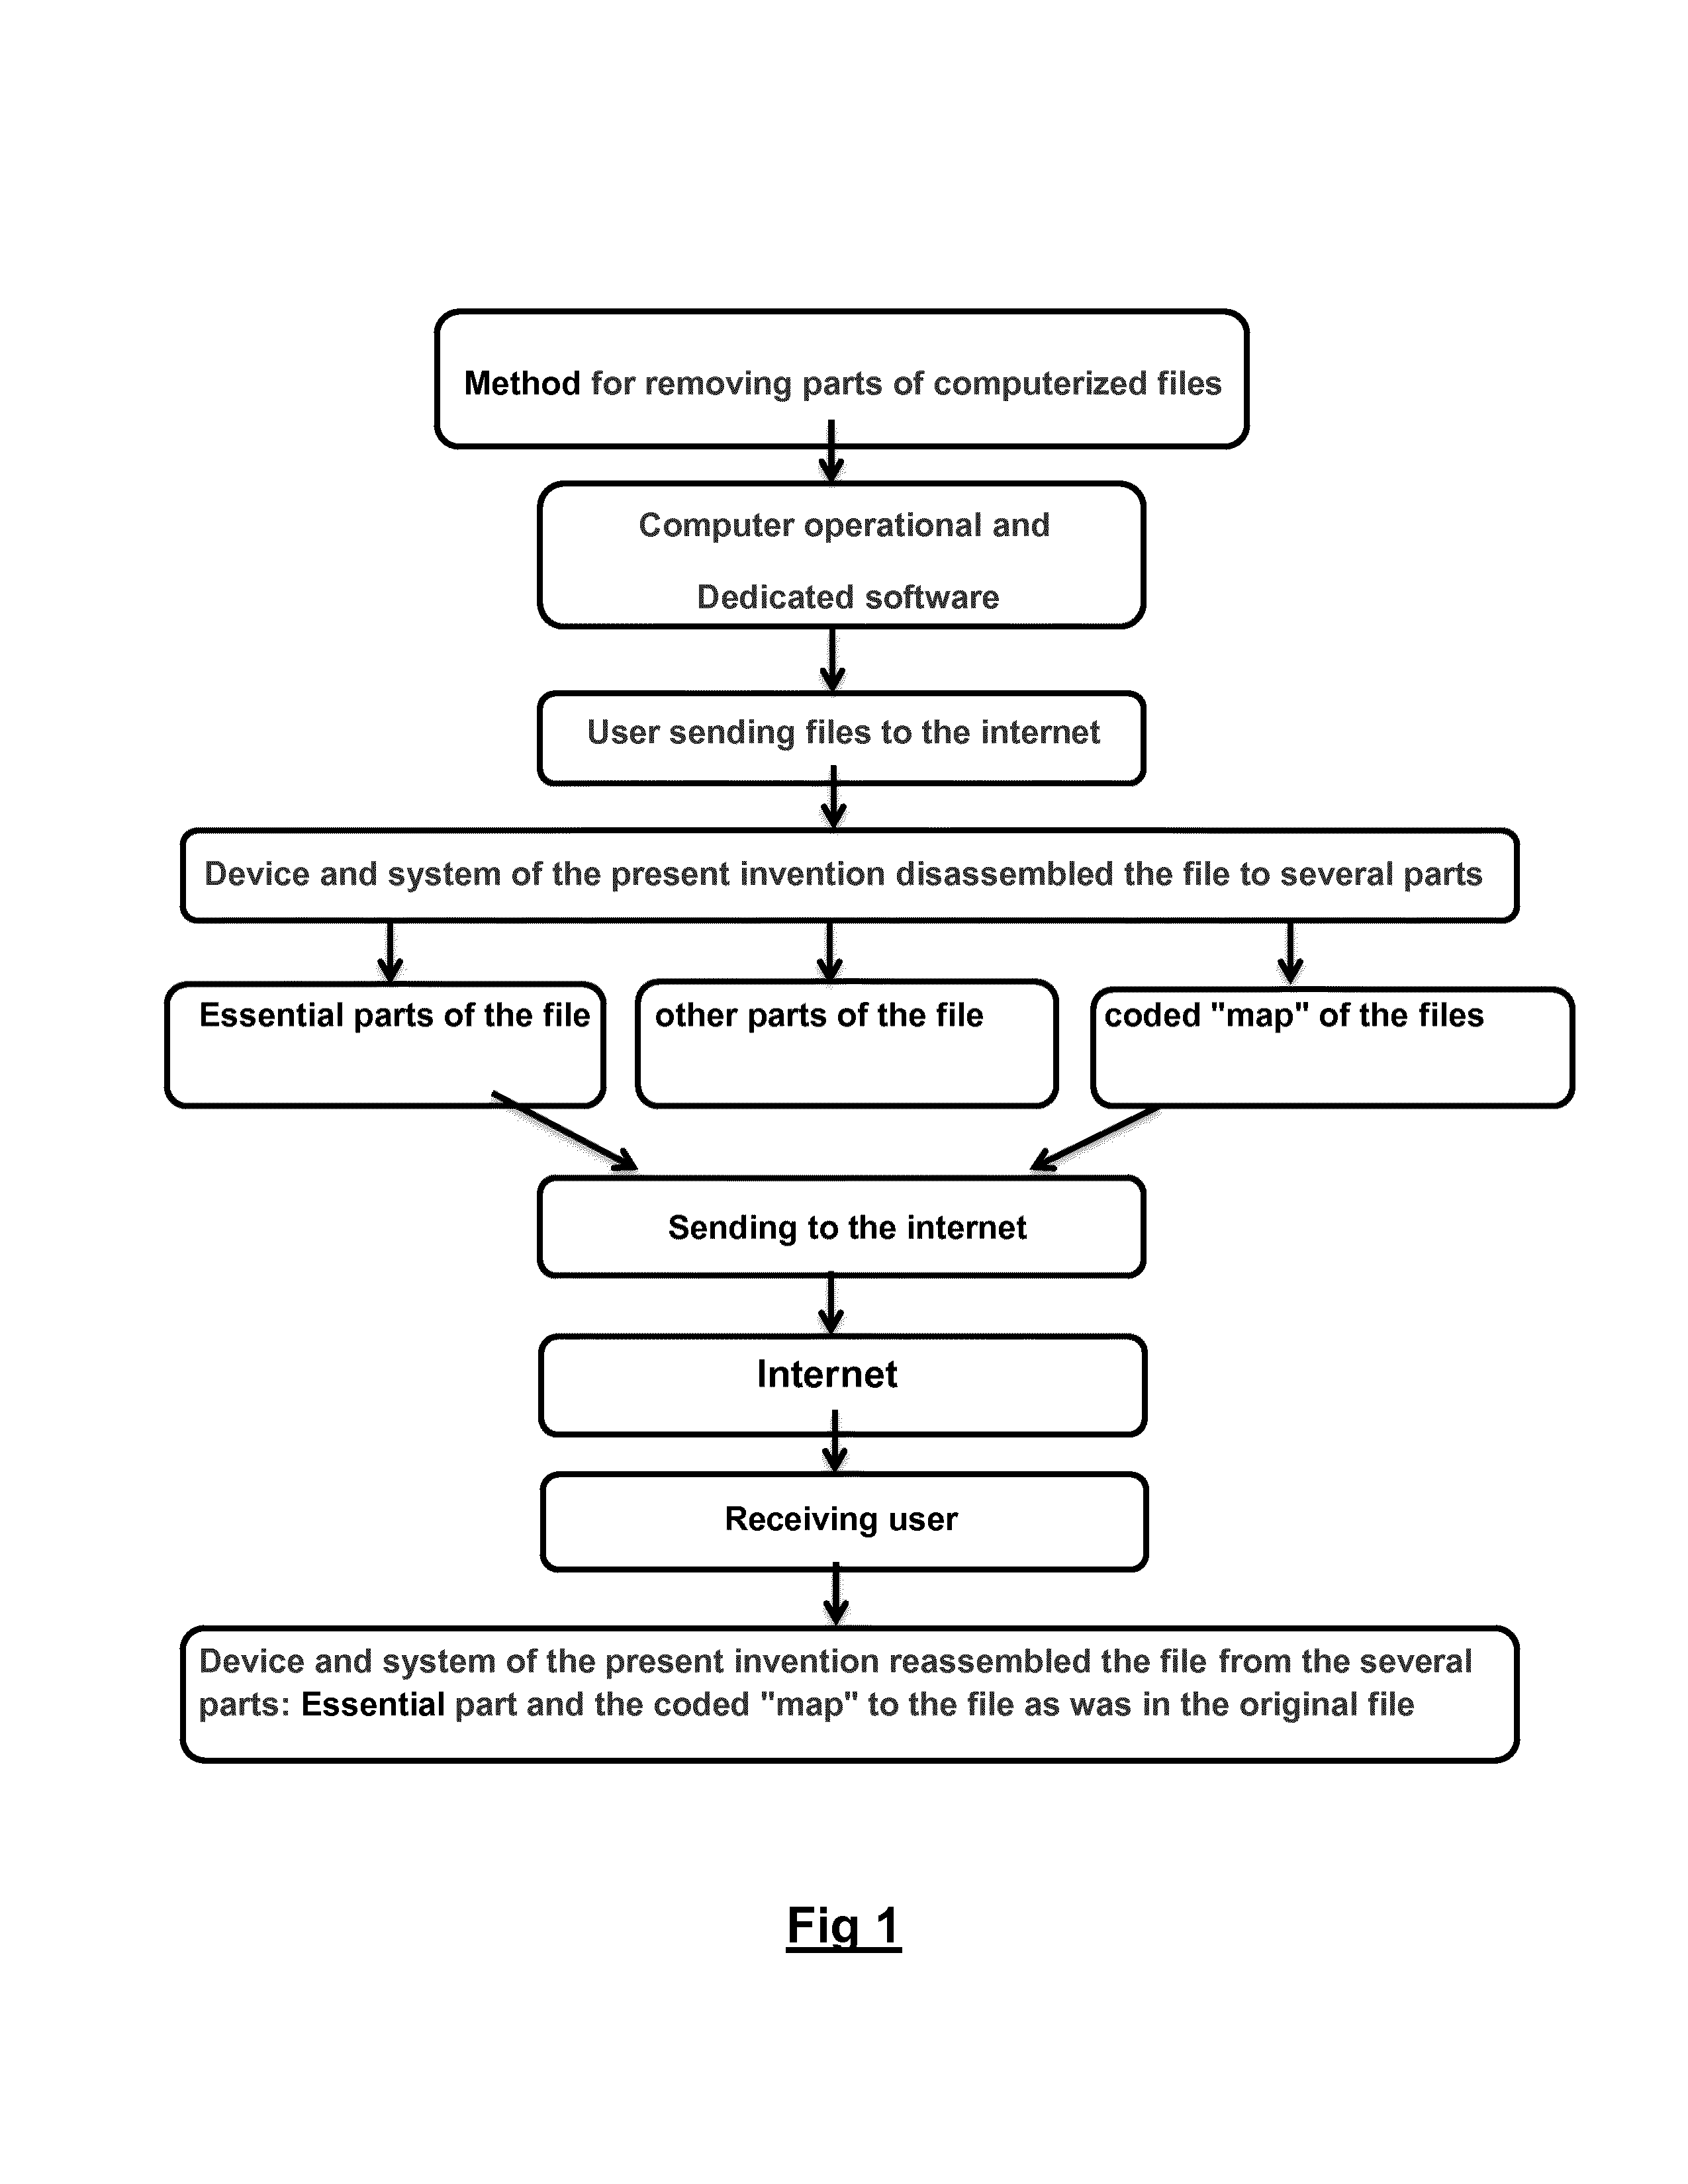 Method system and device for removing parts of computerized files that are sending through the internet and assembling them back at the receiving computer unit